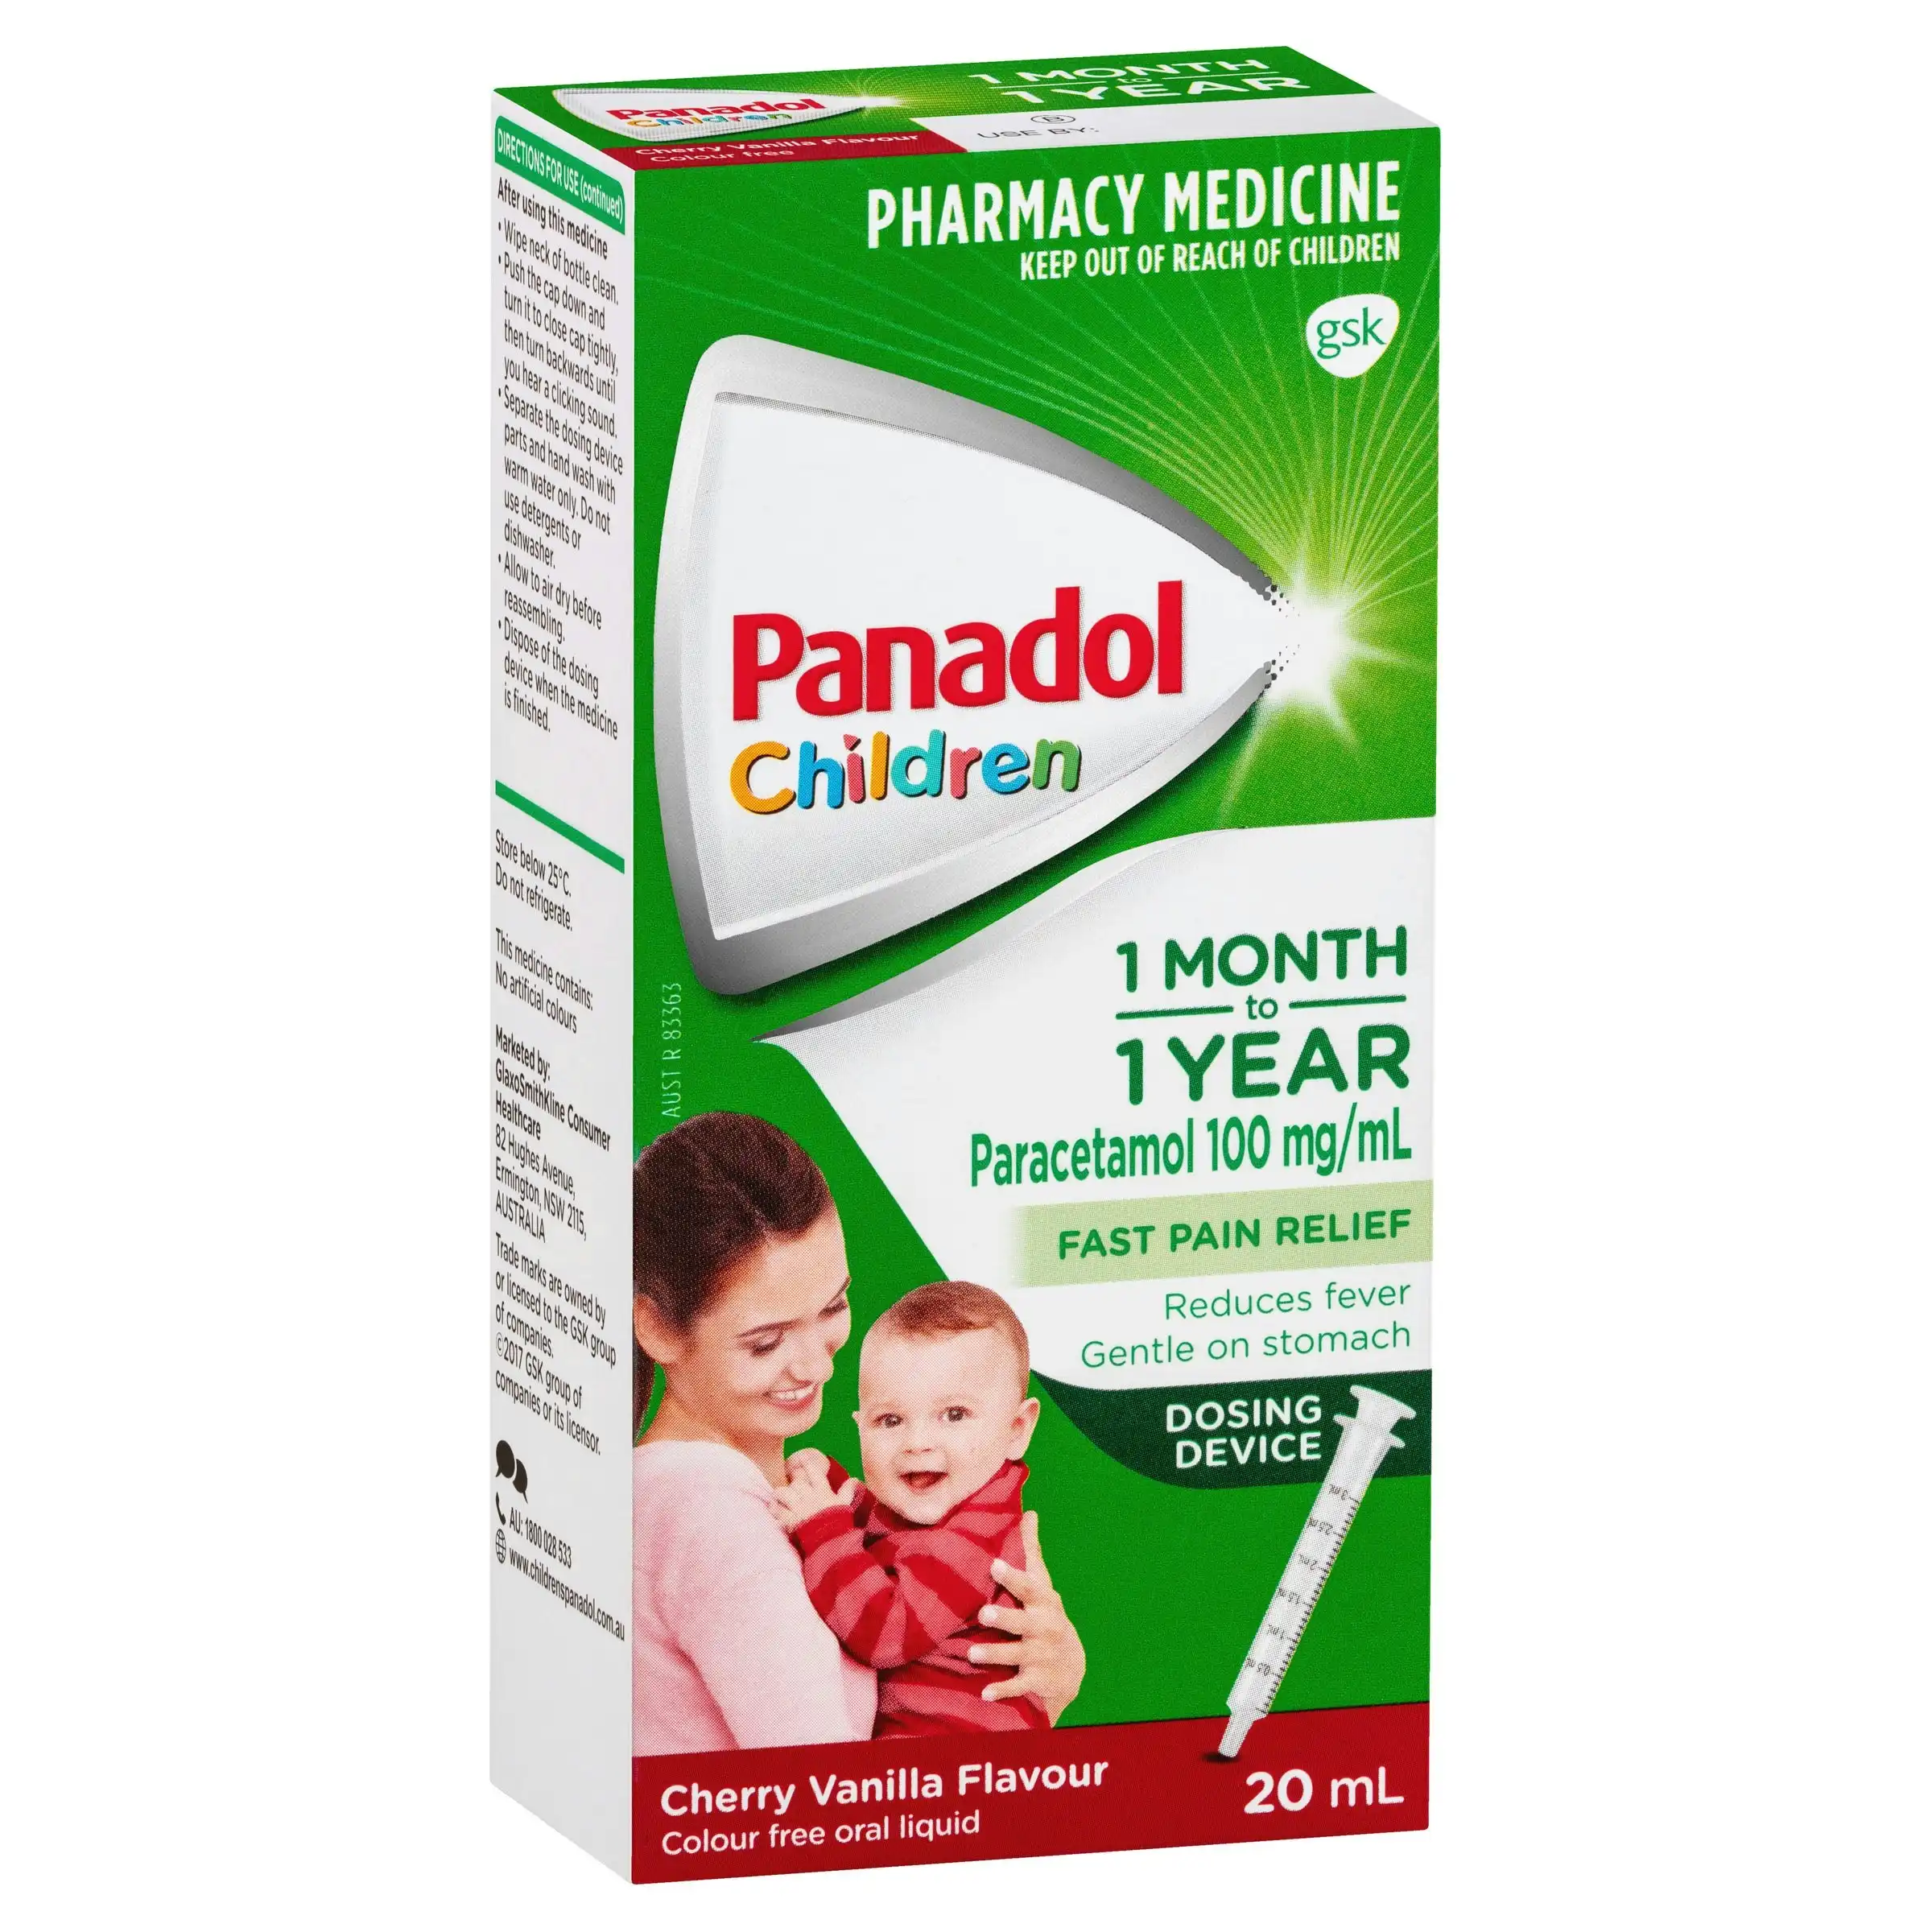 Panadol Children 1 Month - 1 Year Baby Drops with Dosing Device, Fever and Pain Relief, 20mL